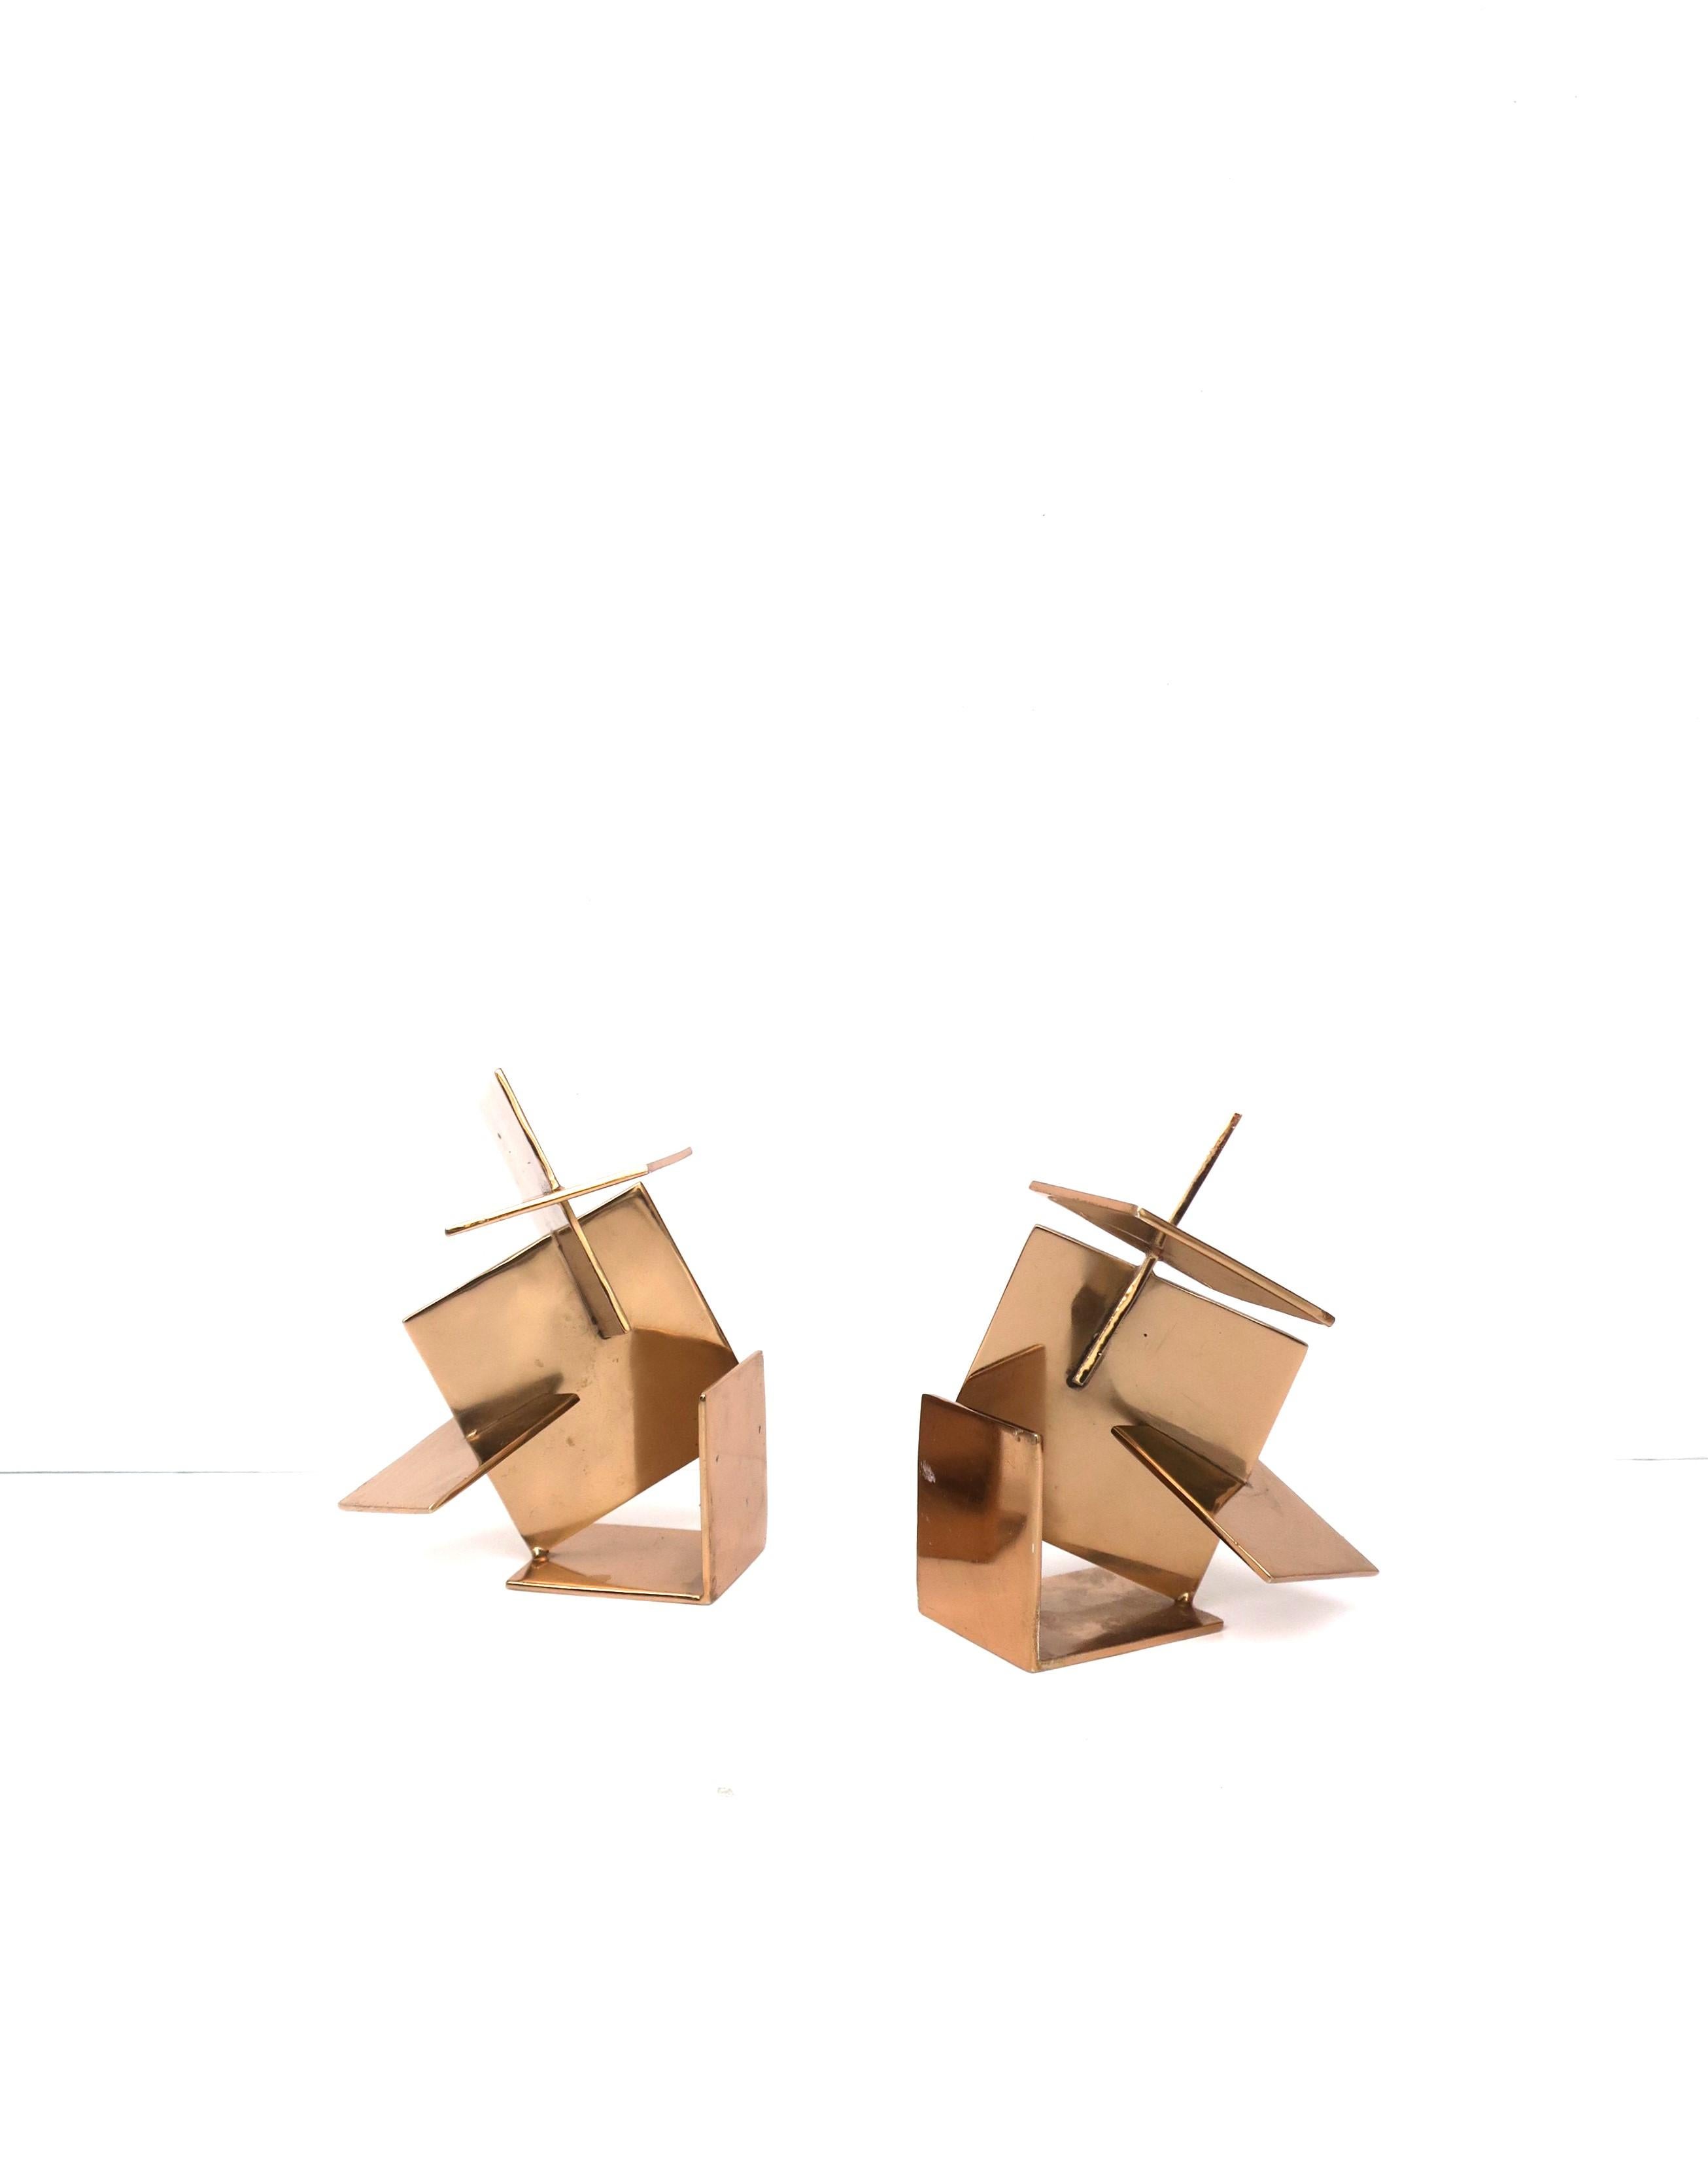 A substantial pair of metal bookends with a geometric abstract design and a copper-rose gold hue, in the Post-Modern Deconstructivist design style. Pair could work well as individual sculptures or as bookends, their indented use, as demonstrated in